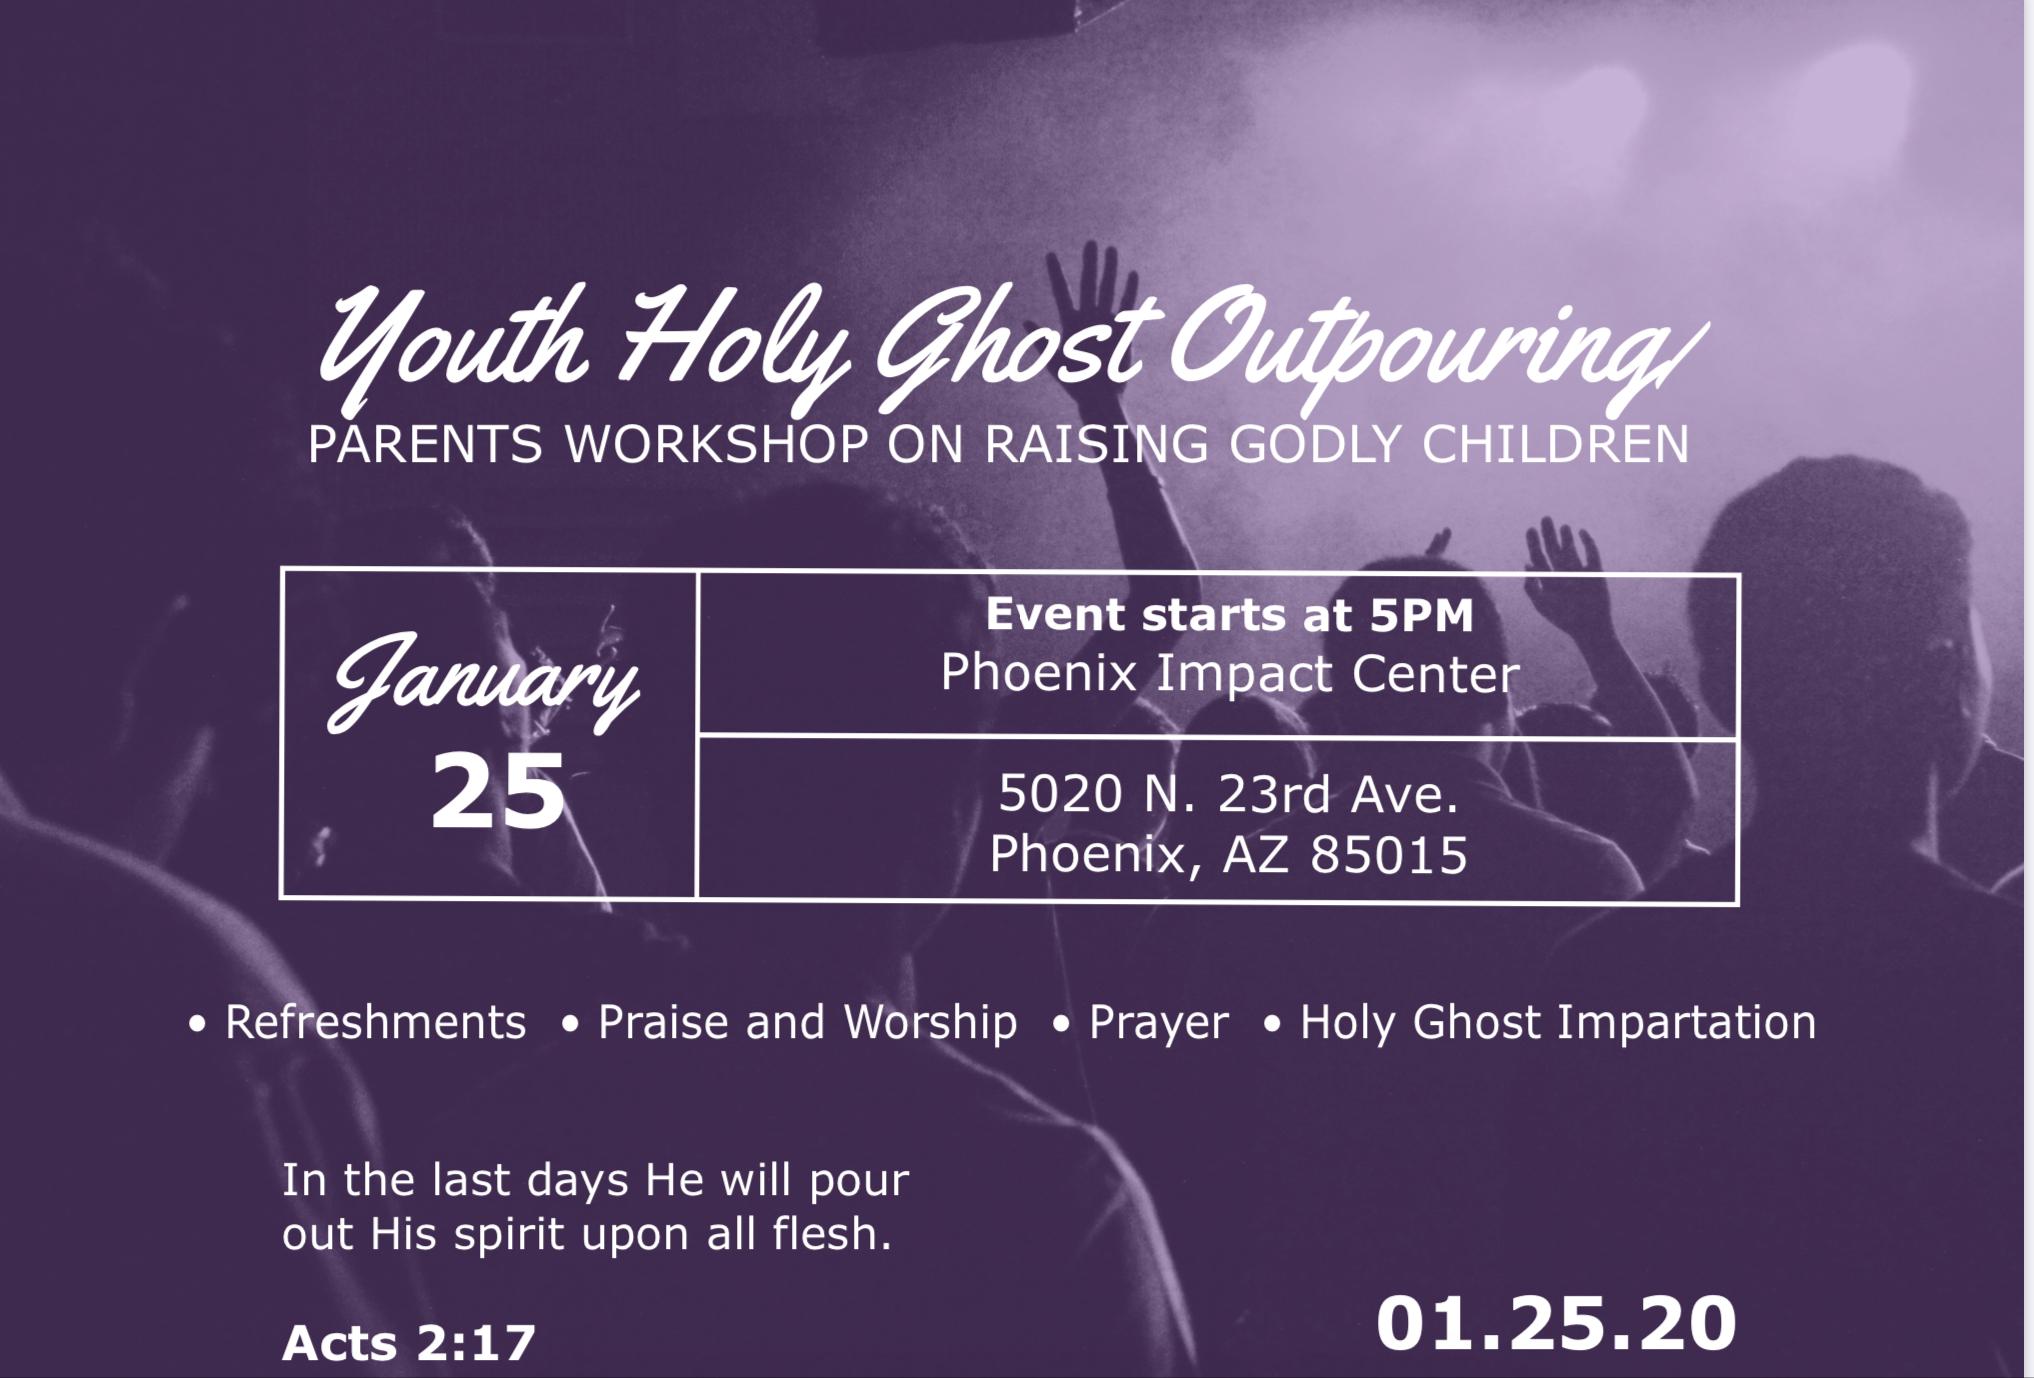 Youth Holy Ghost Outpouring